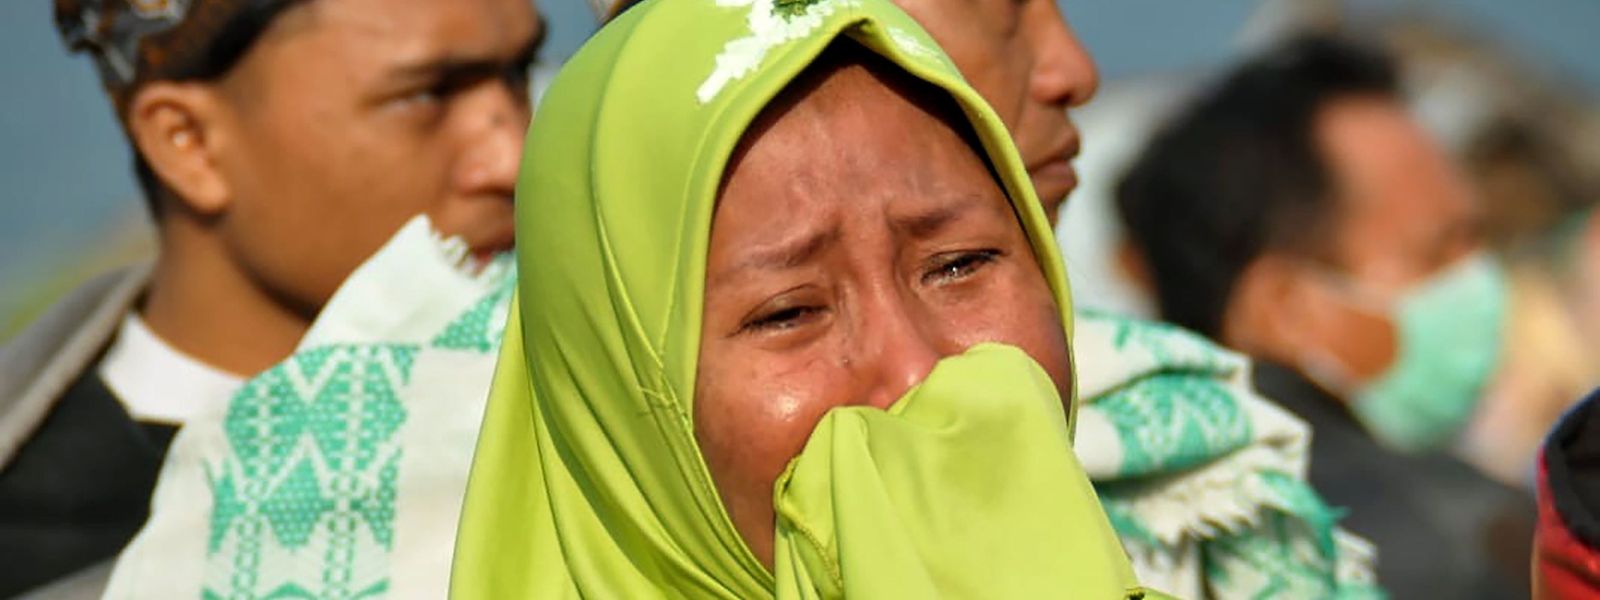 A woman cries as people look at the damages after an earthquake and a tsunami hit Palu, on Sulawesi island on September 29, 2018. - Rescuers scrambled to reach tsunami-hit central Indonesia and assess the damage after a strong quake brought down several buildings and sent locals fleeing their homes for higher ground. (Photo by MUHAMMAD RIFKI / AFP)